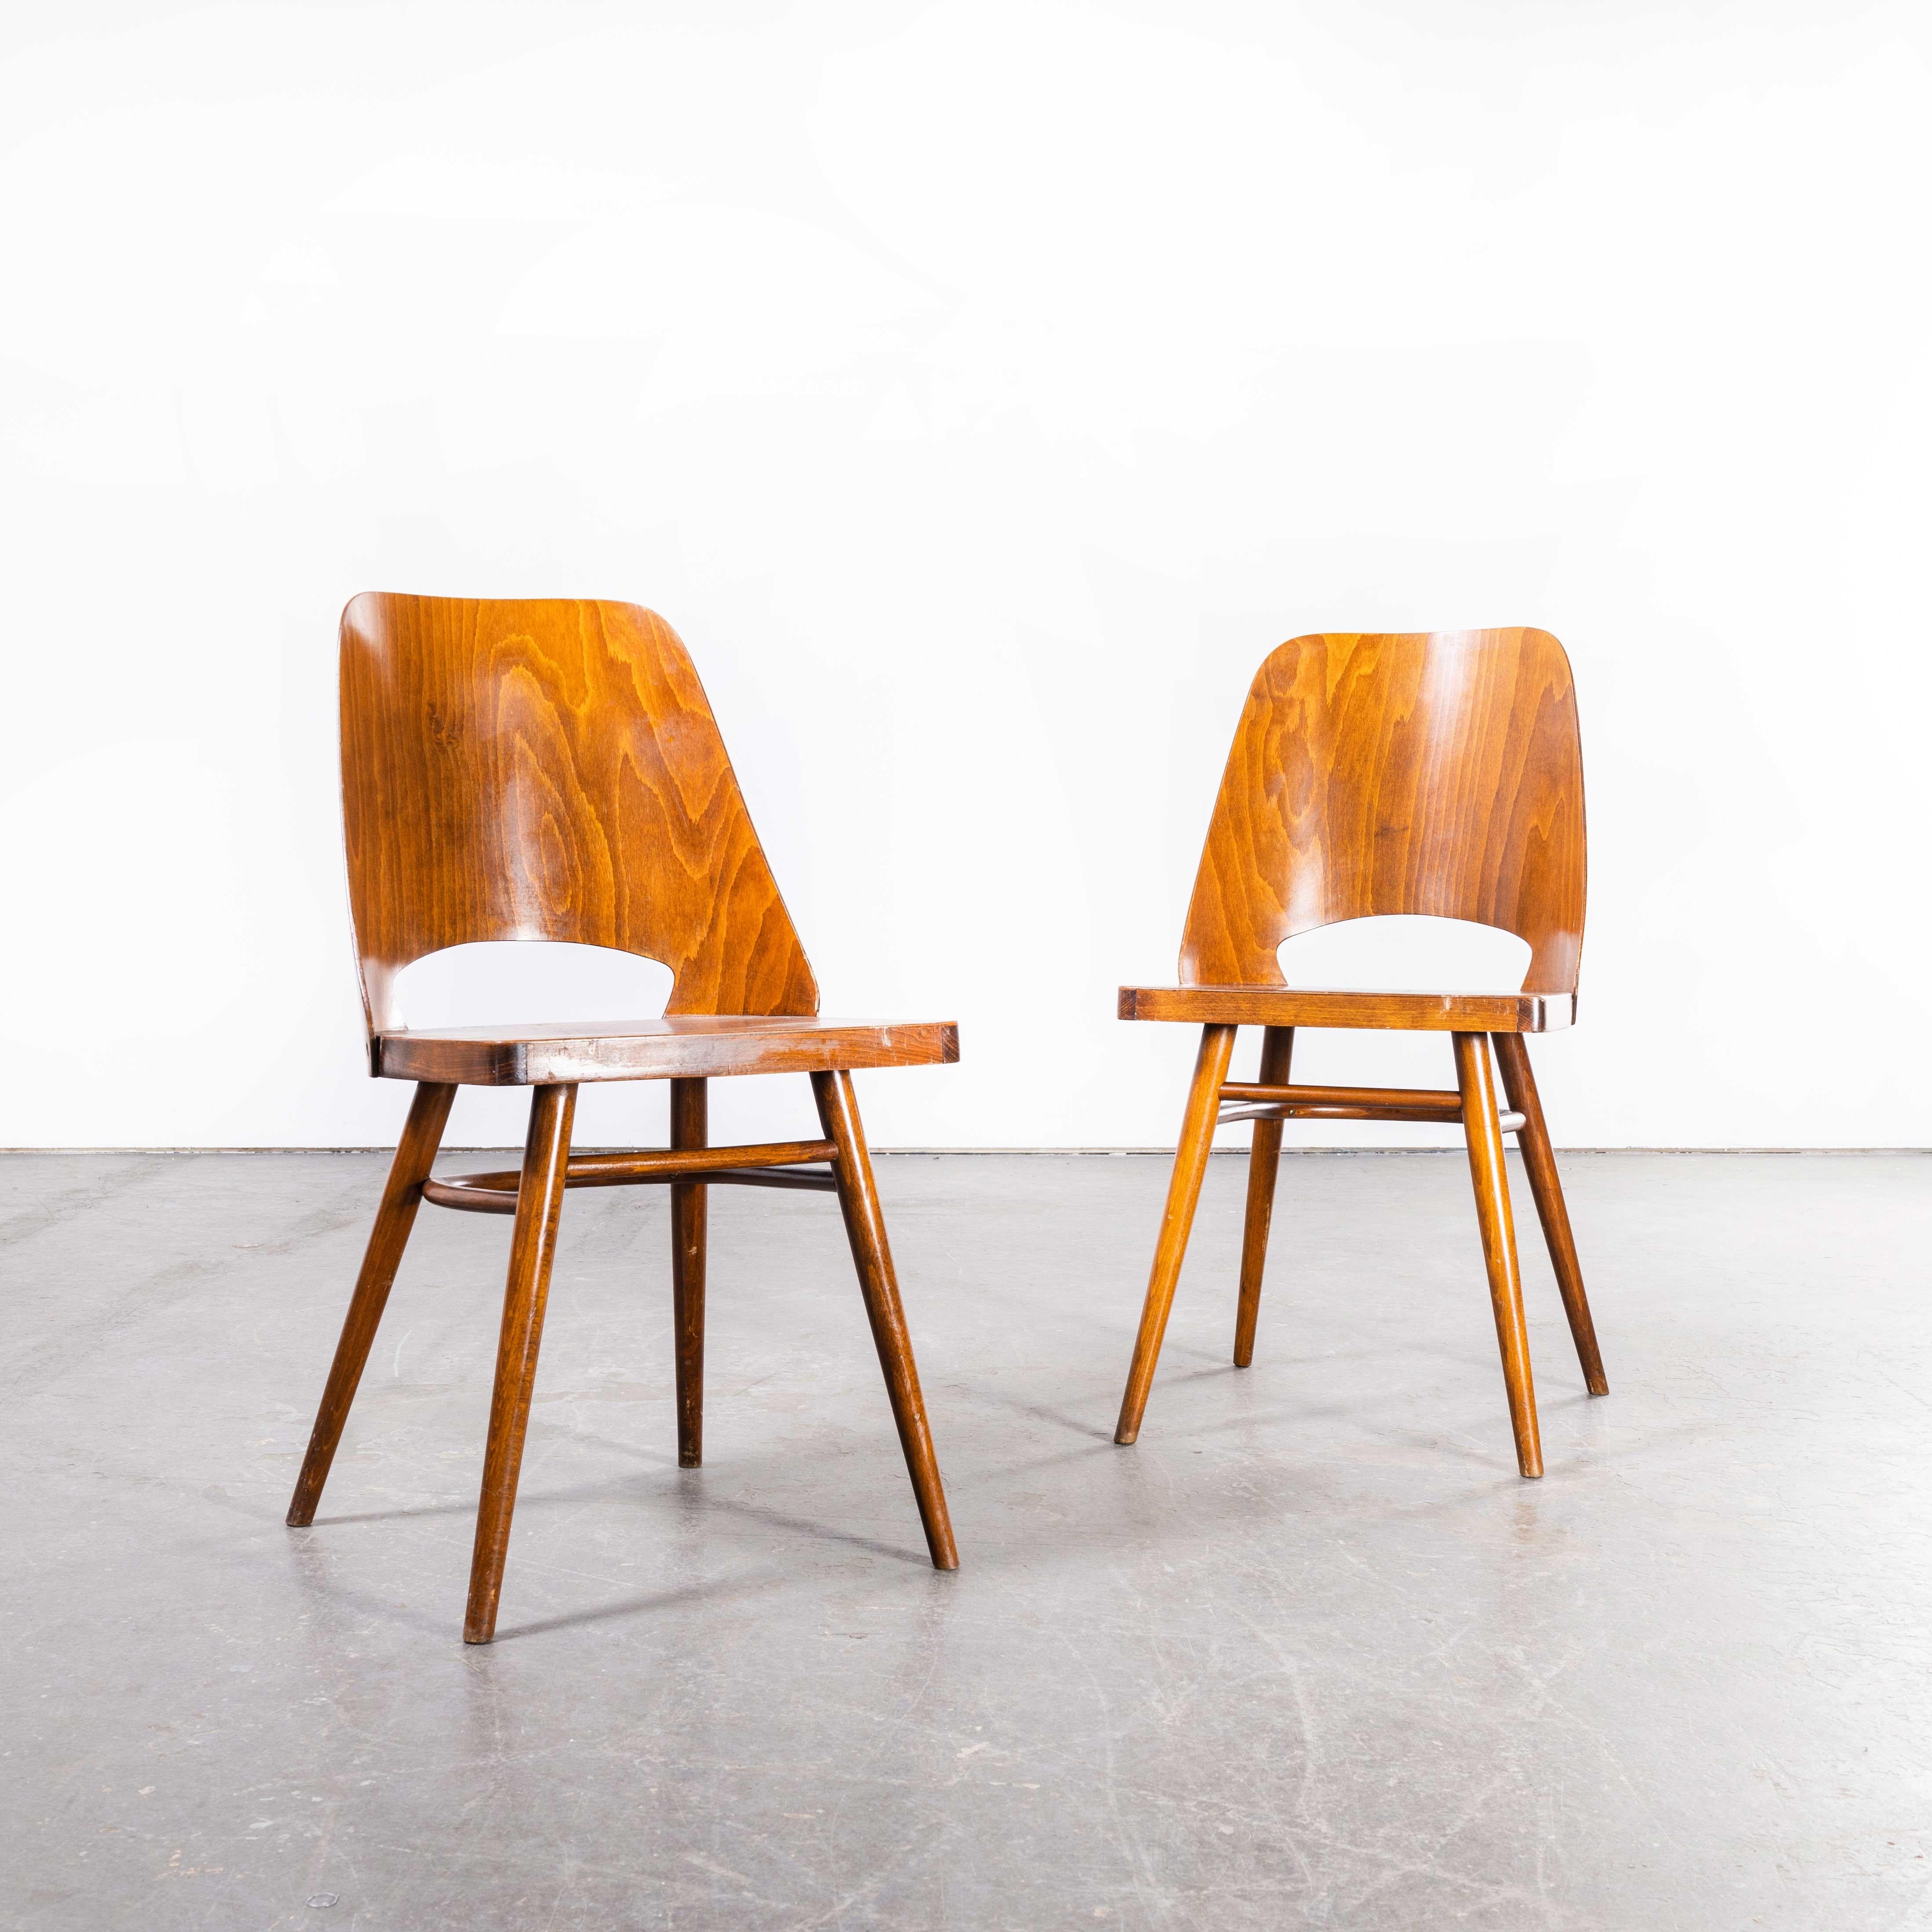 1950’s Honey Beech Dining Chairs By Radomir Hoffman – Pair
1950’s Honey Beech Dining Chairs By Radomir Hoffman – Pair. These chairs were produced by the famous Czech firm Ton, still trading today and producing beautiful chairs, they are an offshoot